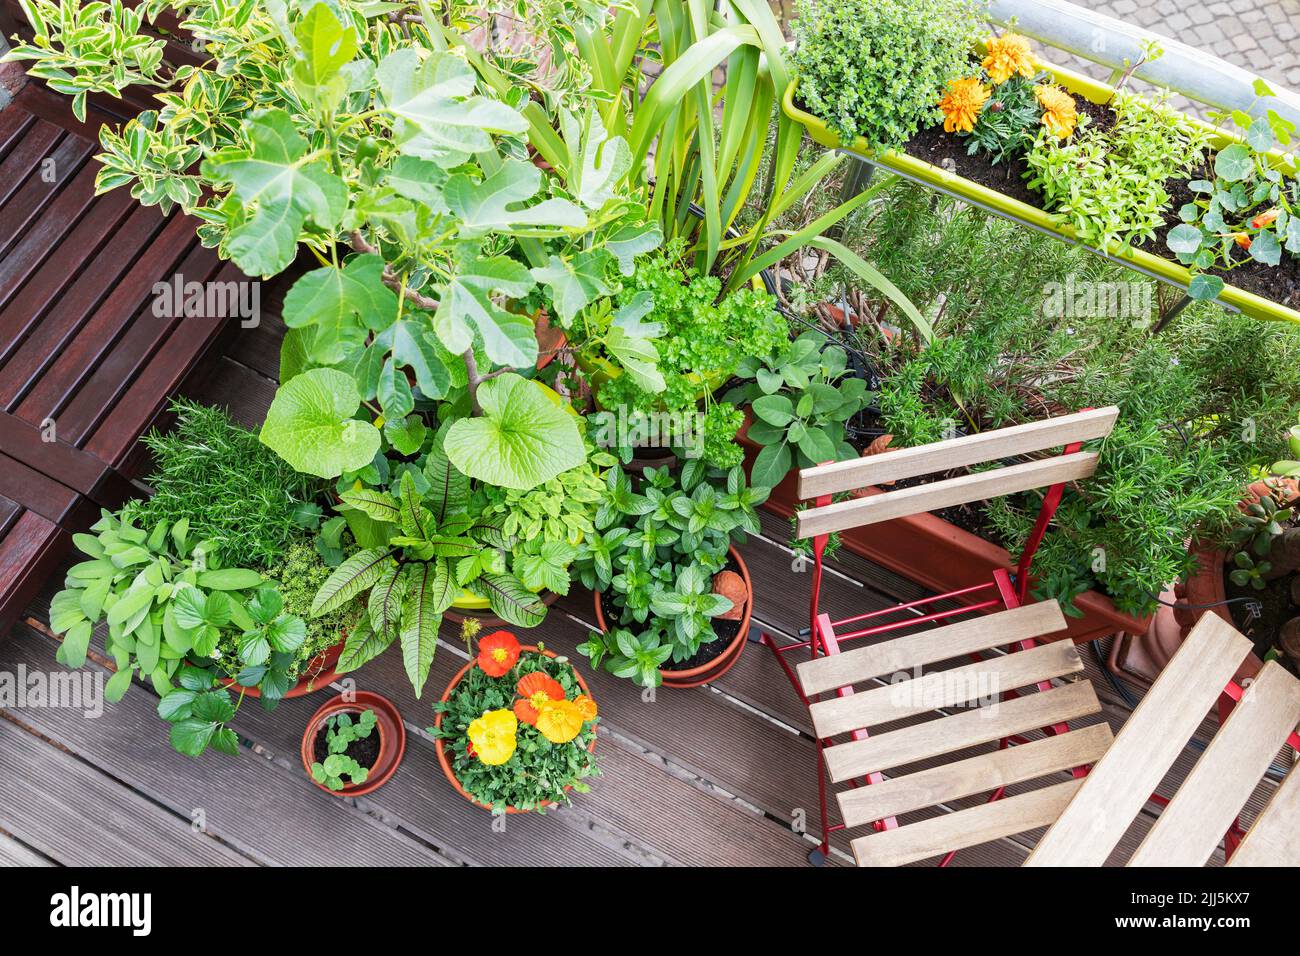 Vegetable and flower plants on balcony Stock Photo